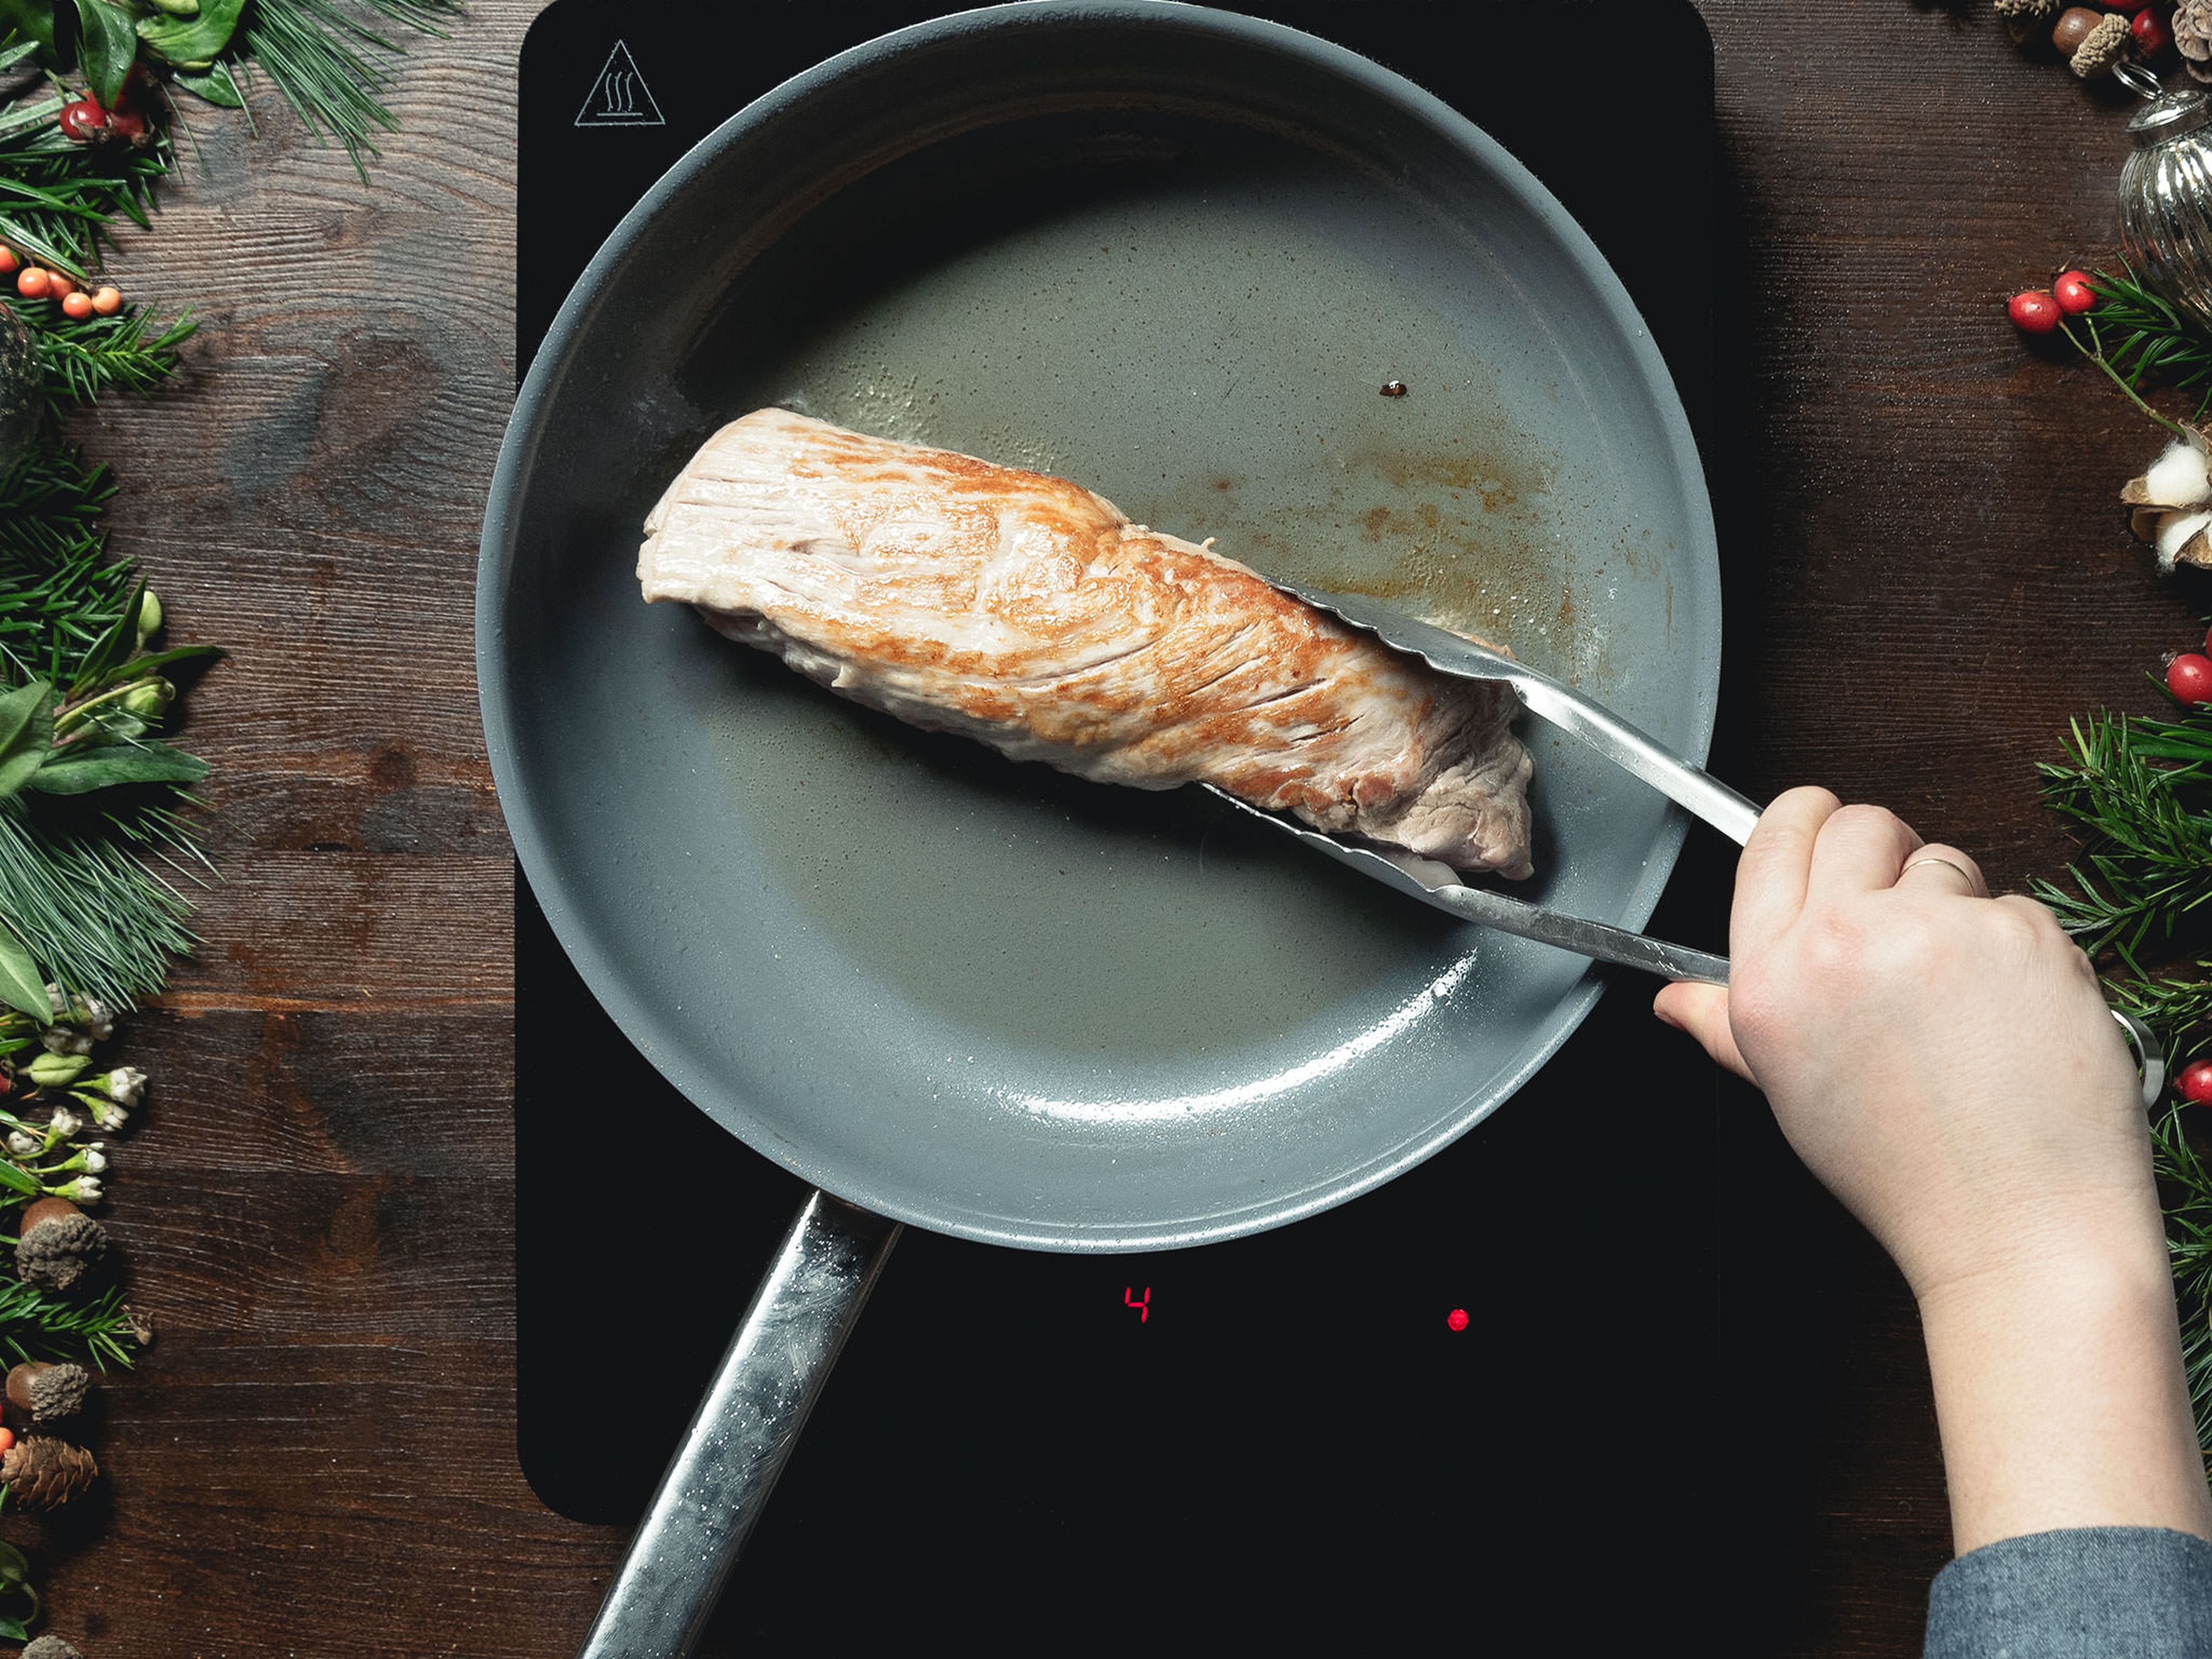 Add some vegetable oil to a frying pan over medium-high heat. Sear the pork until golden brown on both sides and season with salt.